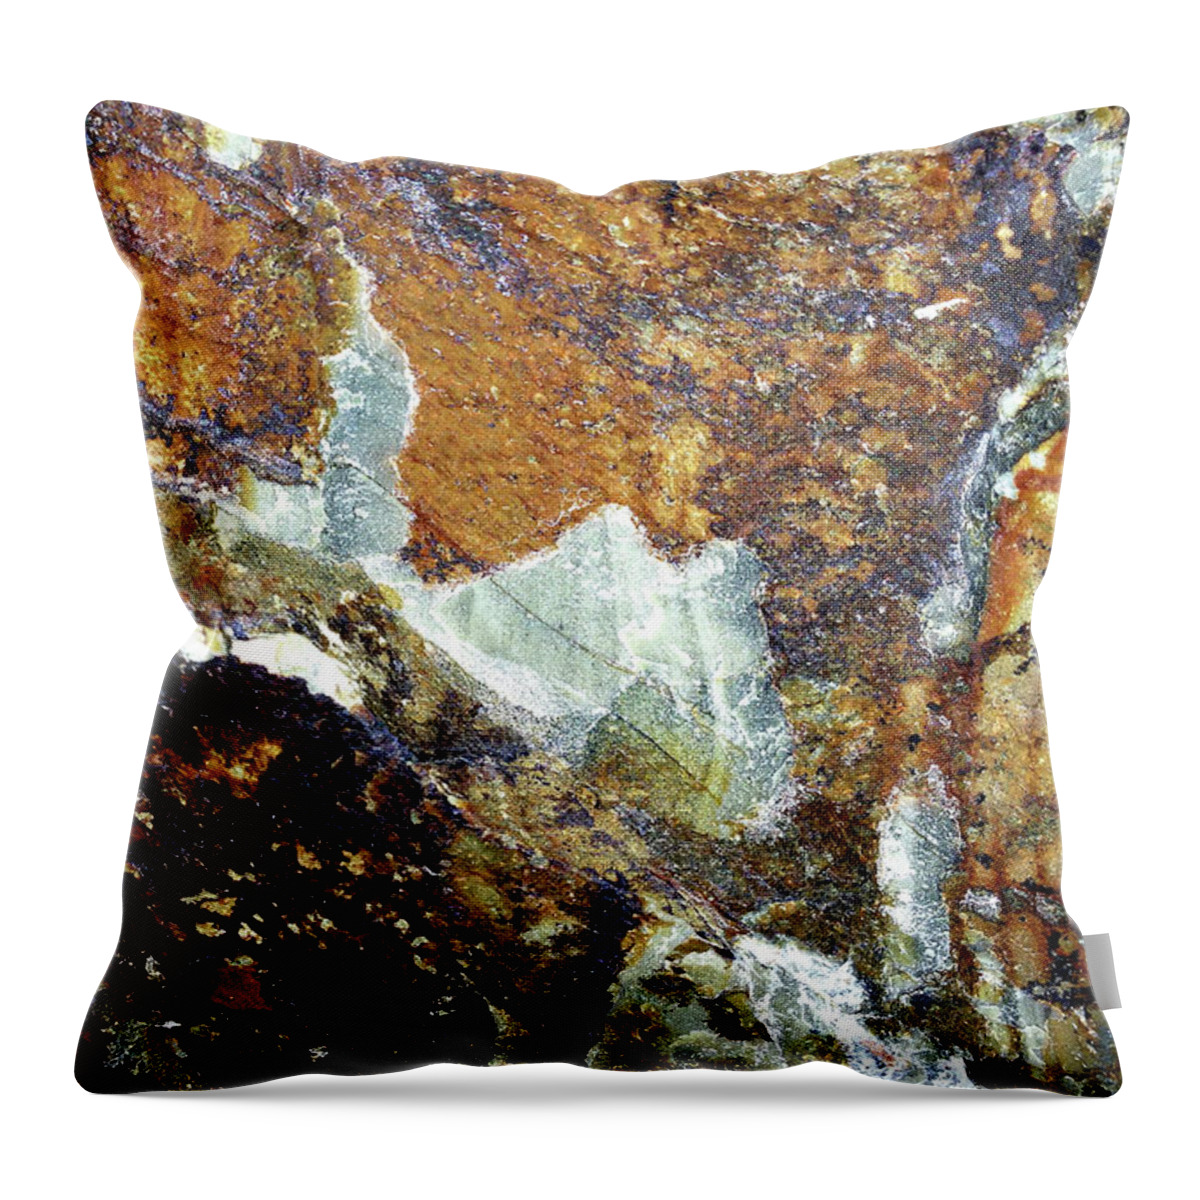 Rock Throw Pillow featuring the photograph Triassic Basin Rock by Linda Bailey